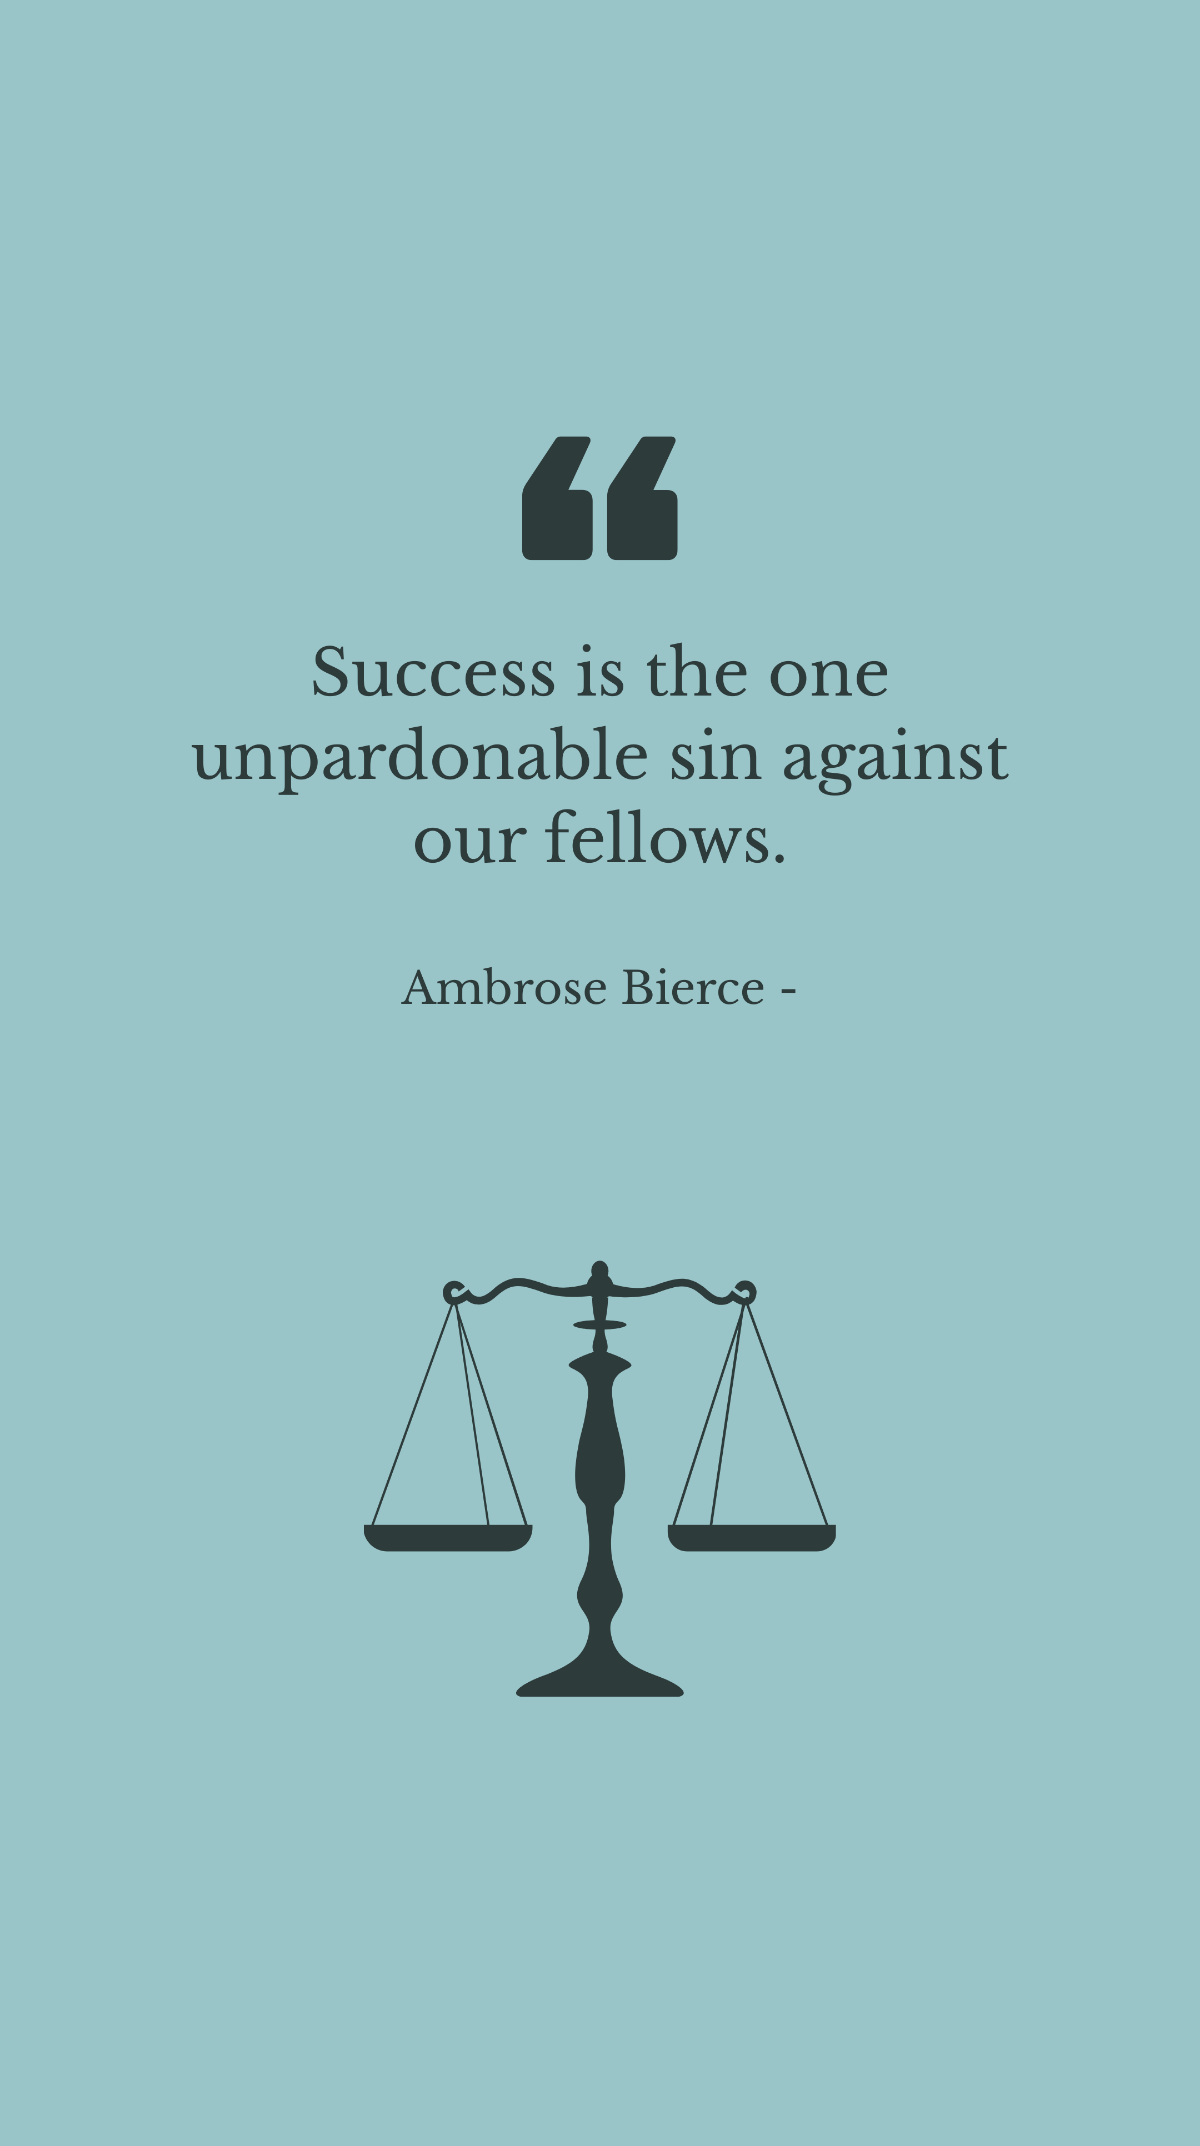 Free Ambrose Bierce - Success is the one unpardonable sin against our fellows. Template